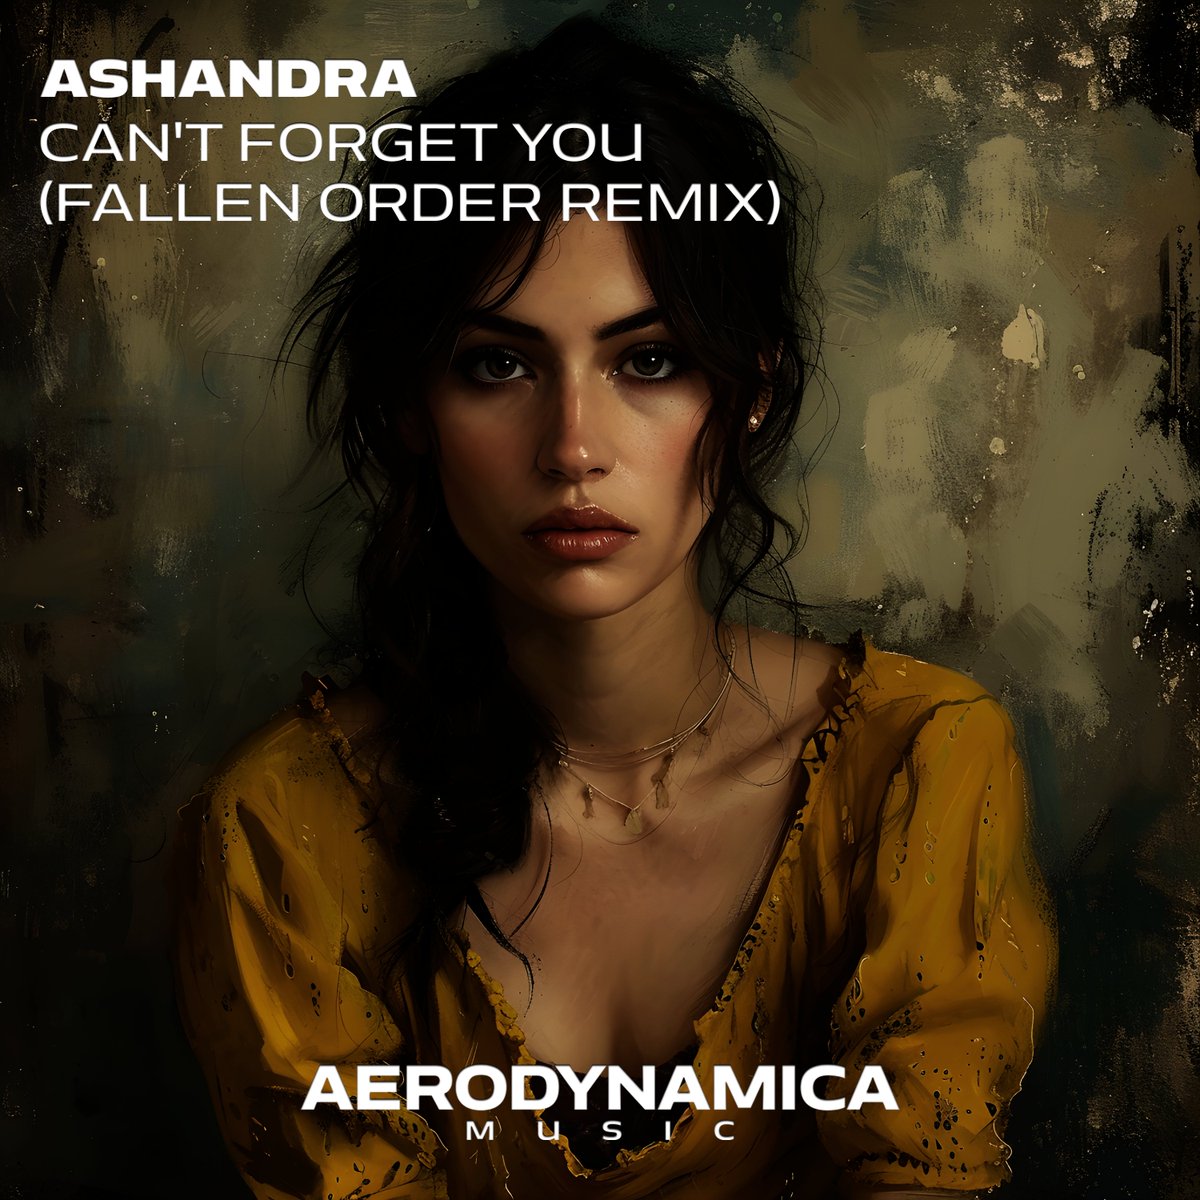 Fallen Order's remix of 'Can't Forget You' will take you to new heights🔥 #trancefamily #trancemusic #trance #upliftingtrance Pre-save the release now: hypeddit.com/ashandra/cantf…